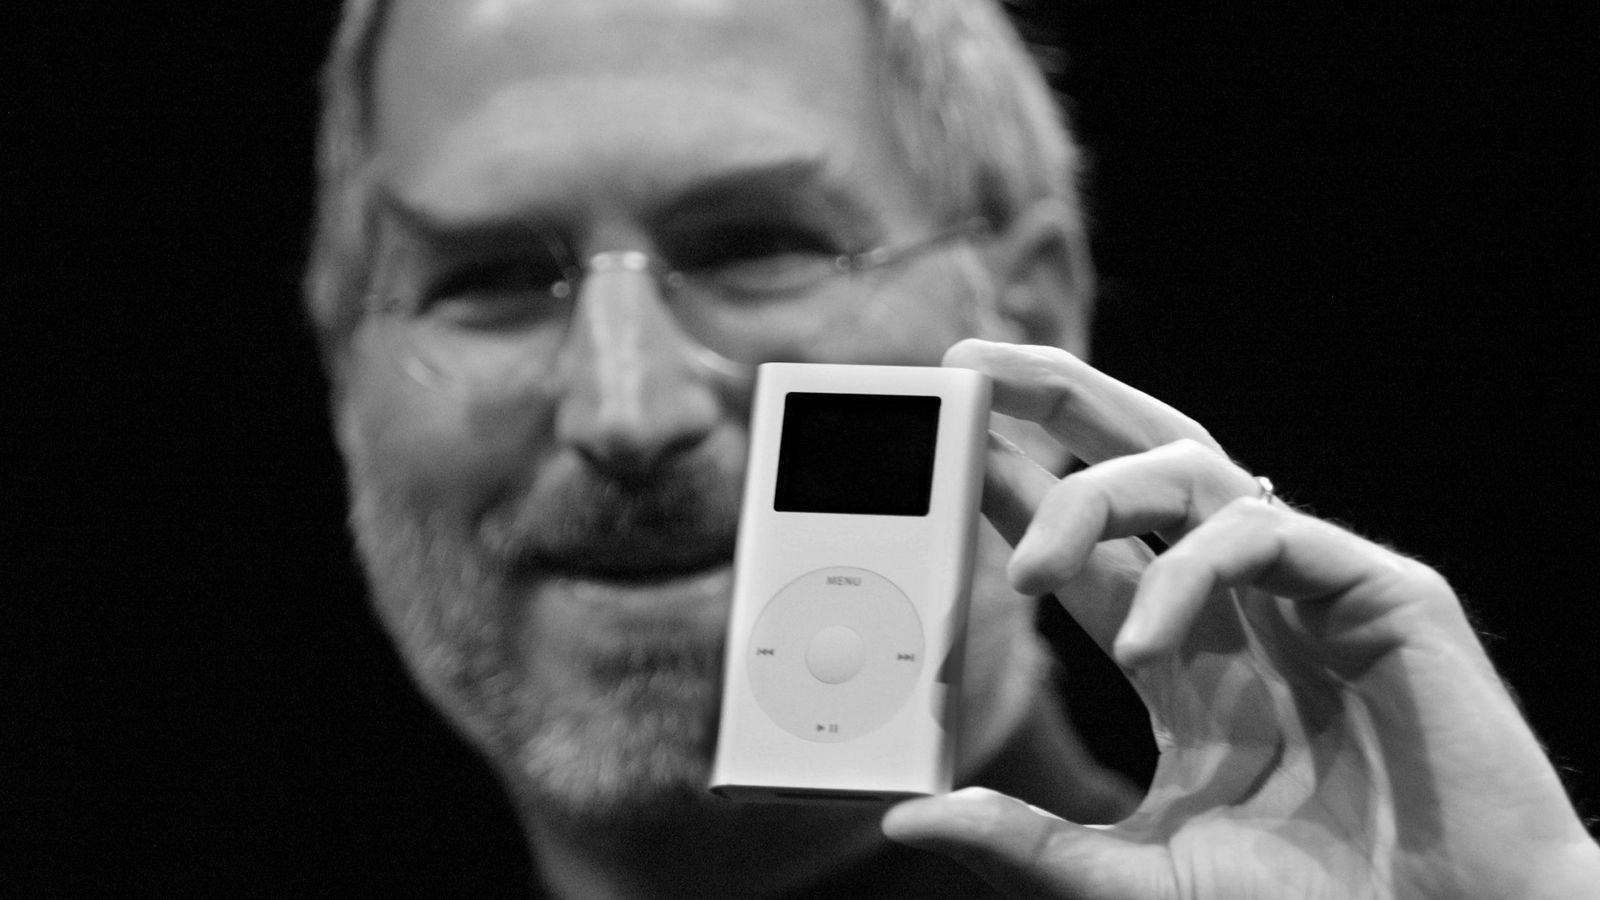 Apple discontinues iPod, 20 years after it was released | Science & Tech News